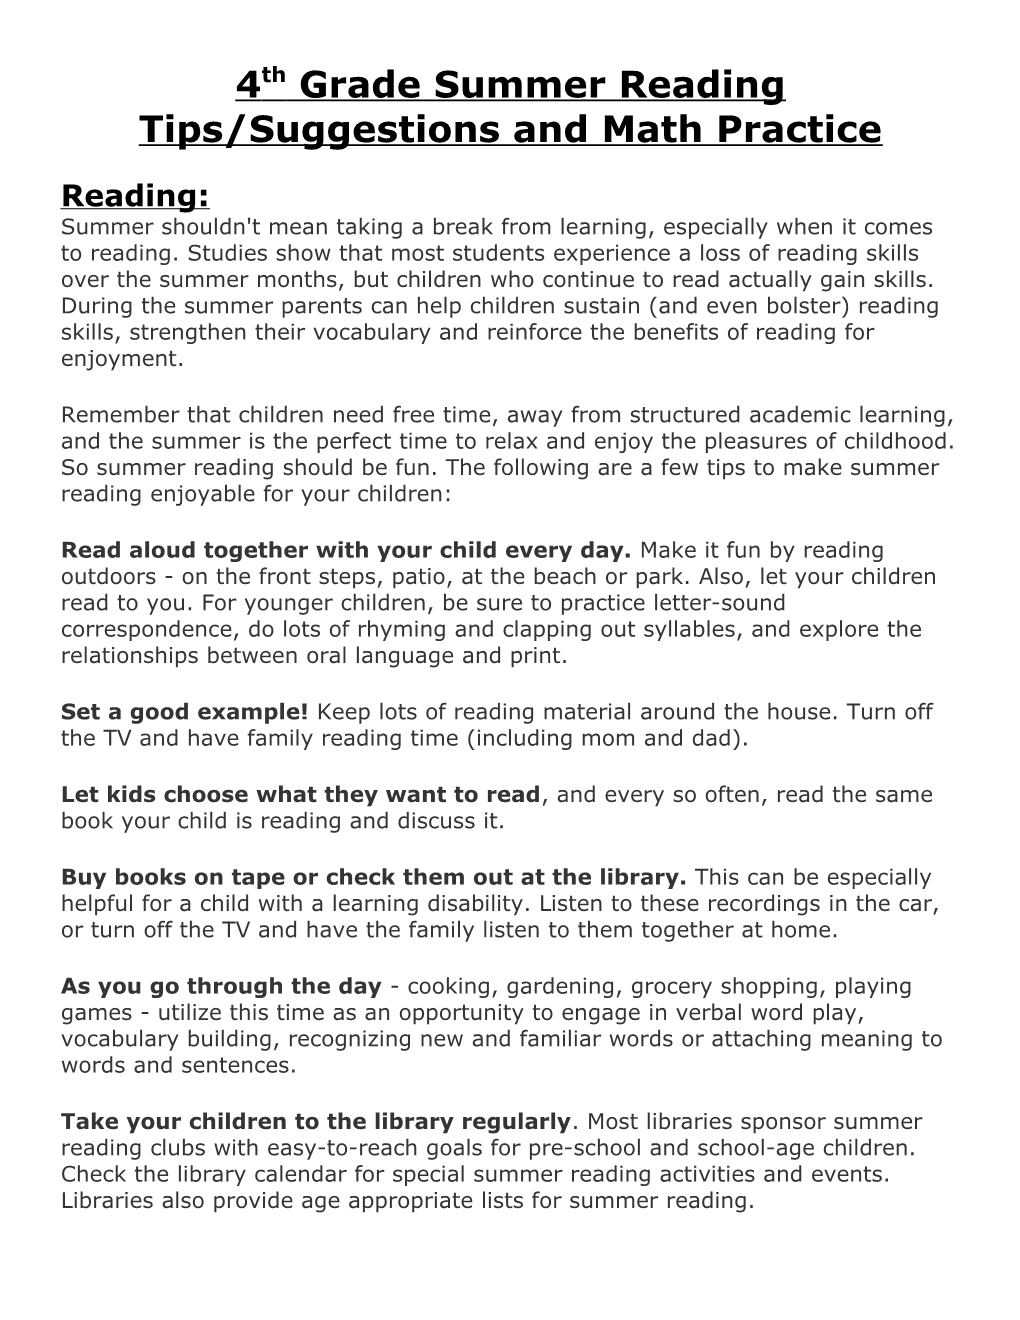 4Th Grade Summer Reading Tips/Suggestions and Math Practice